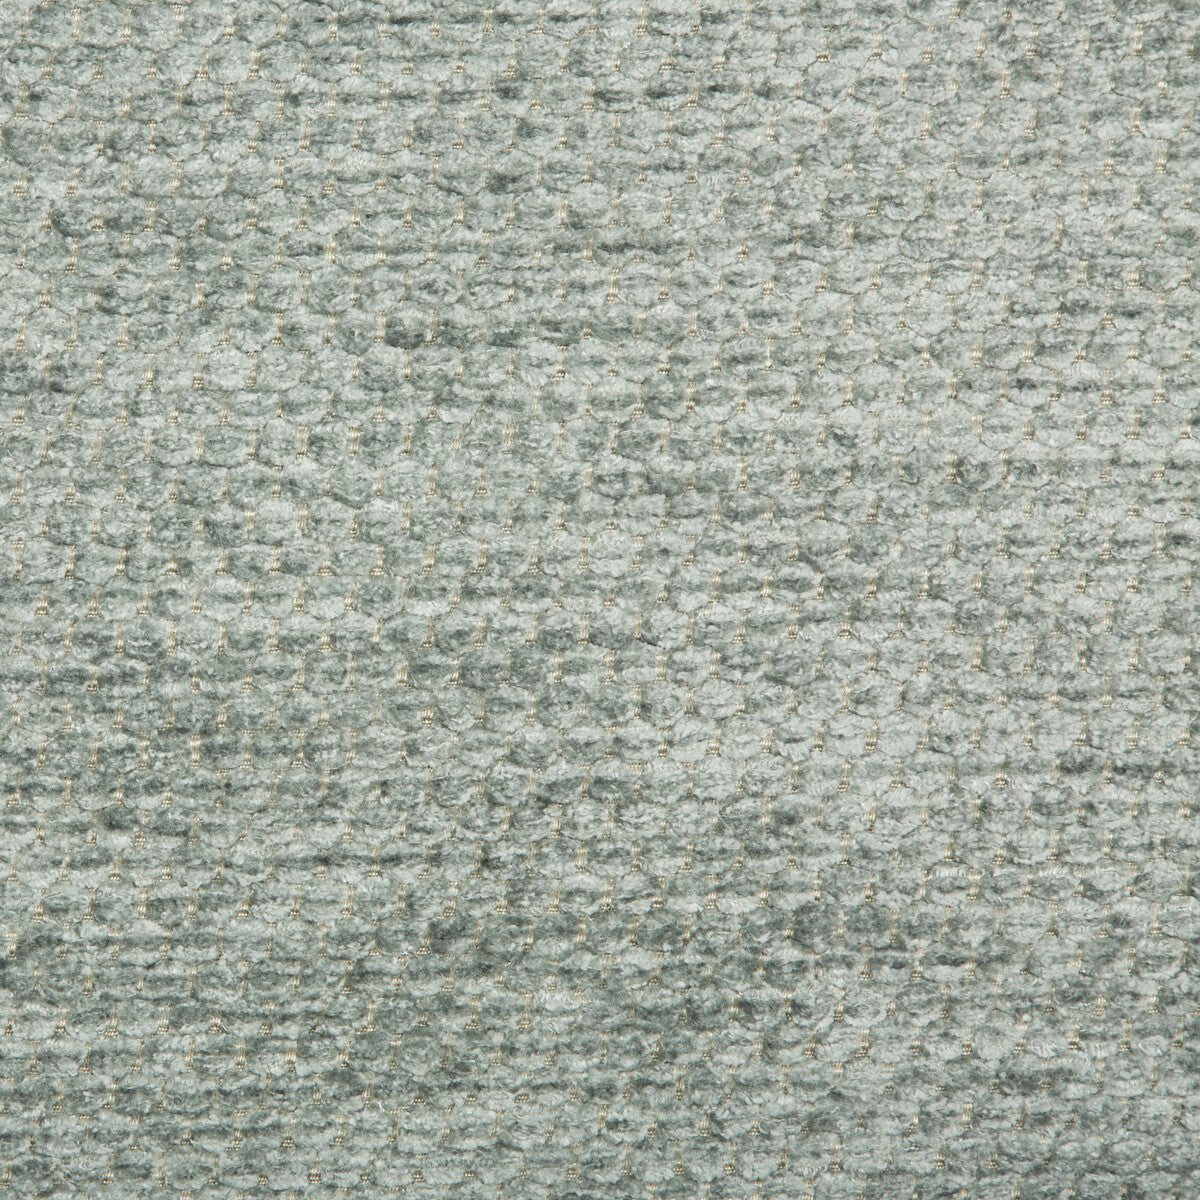 Lonsdale fabric in dusk color - pattern 2016125.15.0 - by Lee Jofa in the Furness Weaves collection